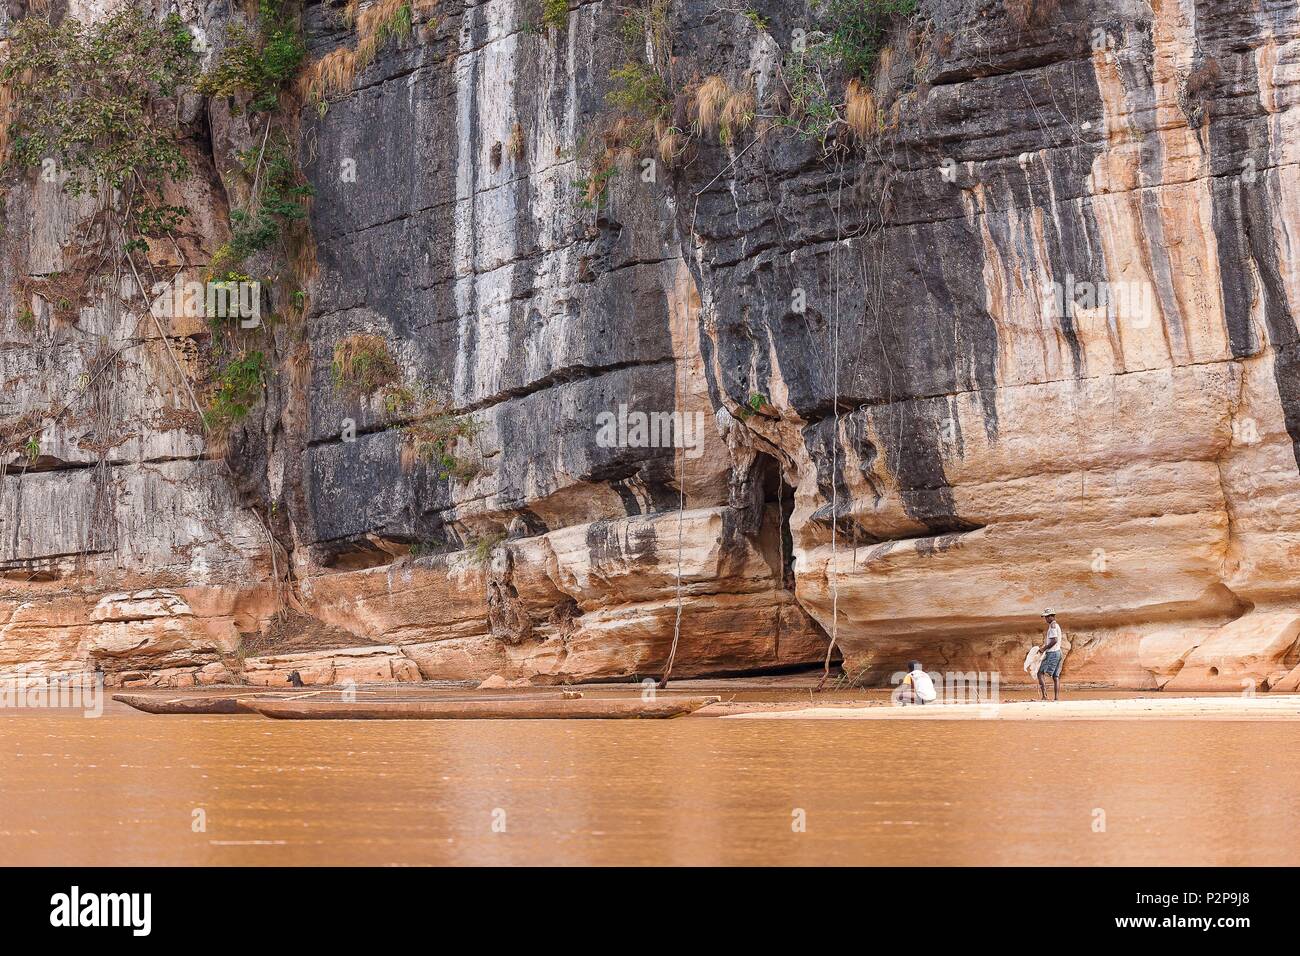 Madagascar, North West region, Tsingy de Bemaraha Strict Nature Reserve park, listed as World Heritage by UNESCO, canoe on the Manambolo River Stock Photo